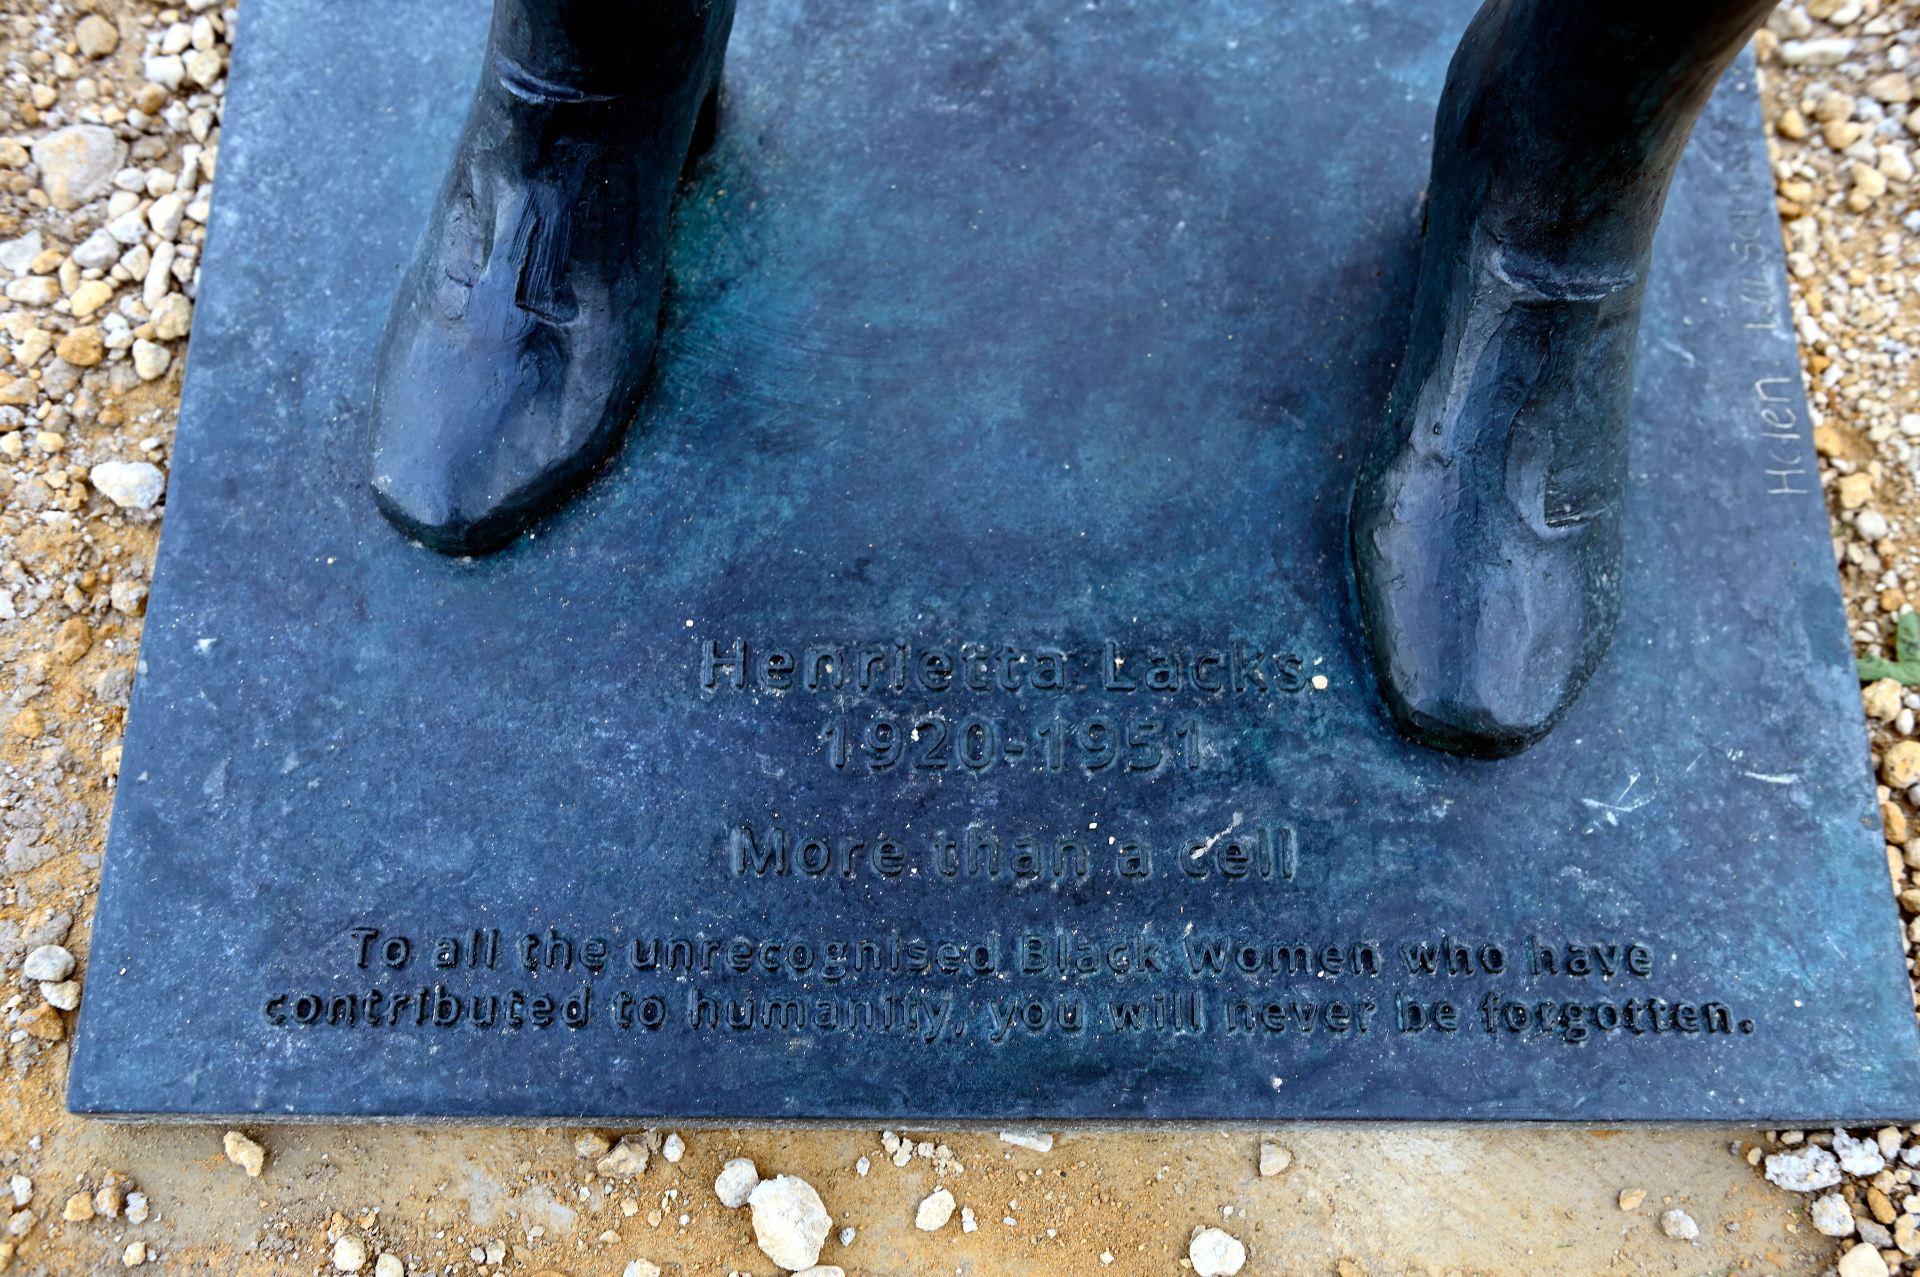 Inscription on the base of the Henrietta Lacks Statue: 'Henrietta Lacks 1920-1951 More than a cell To all the unrecognised Black women who have contributed to humanity, you will never be forgotten.'